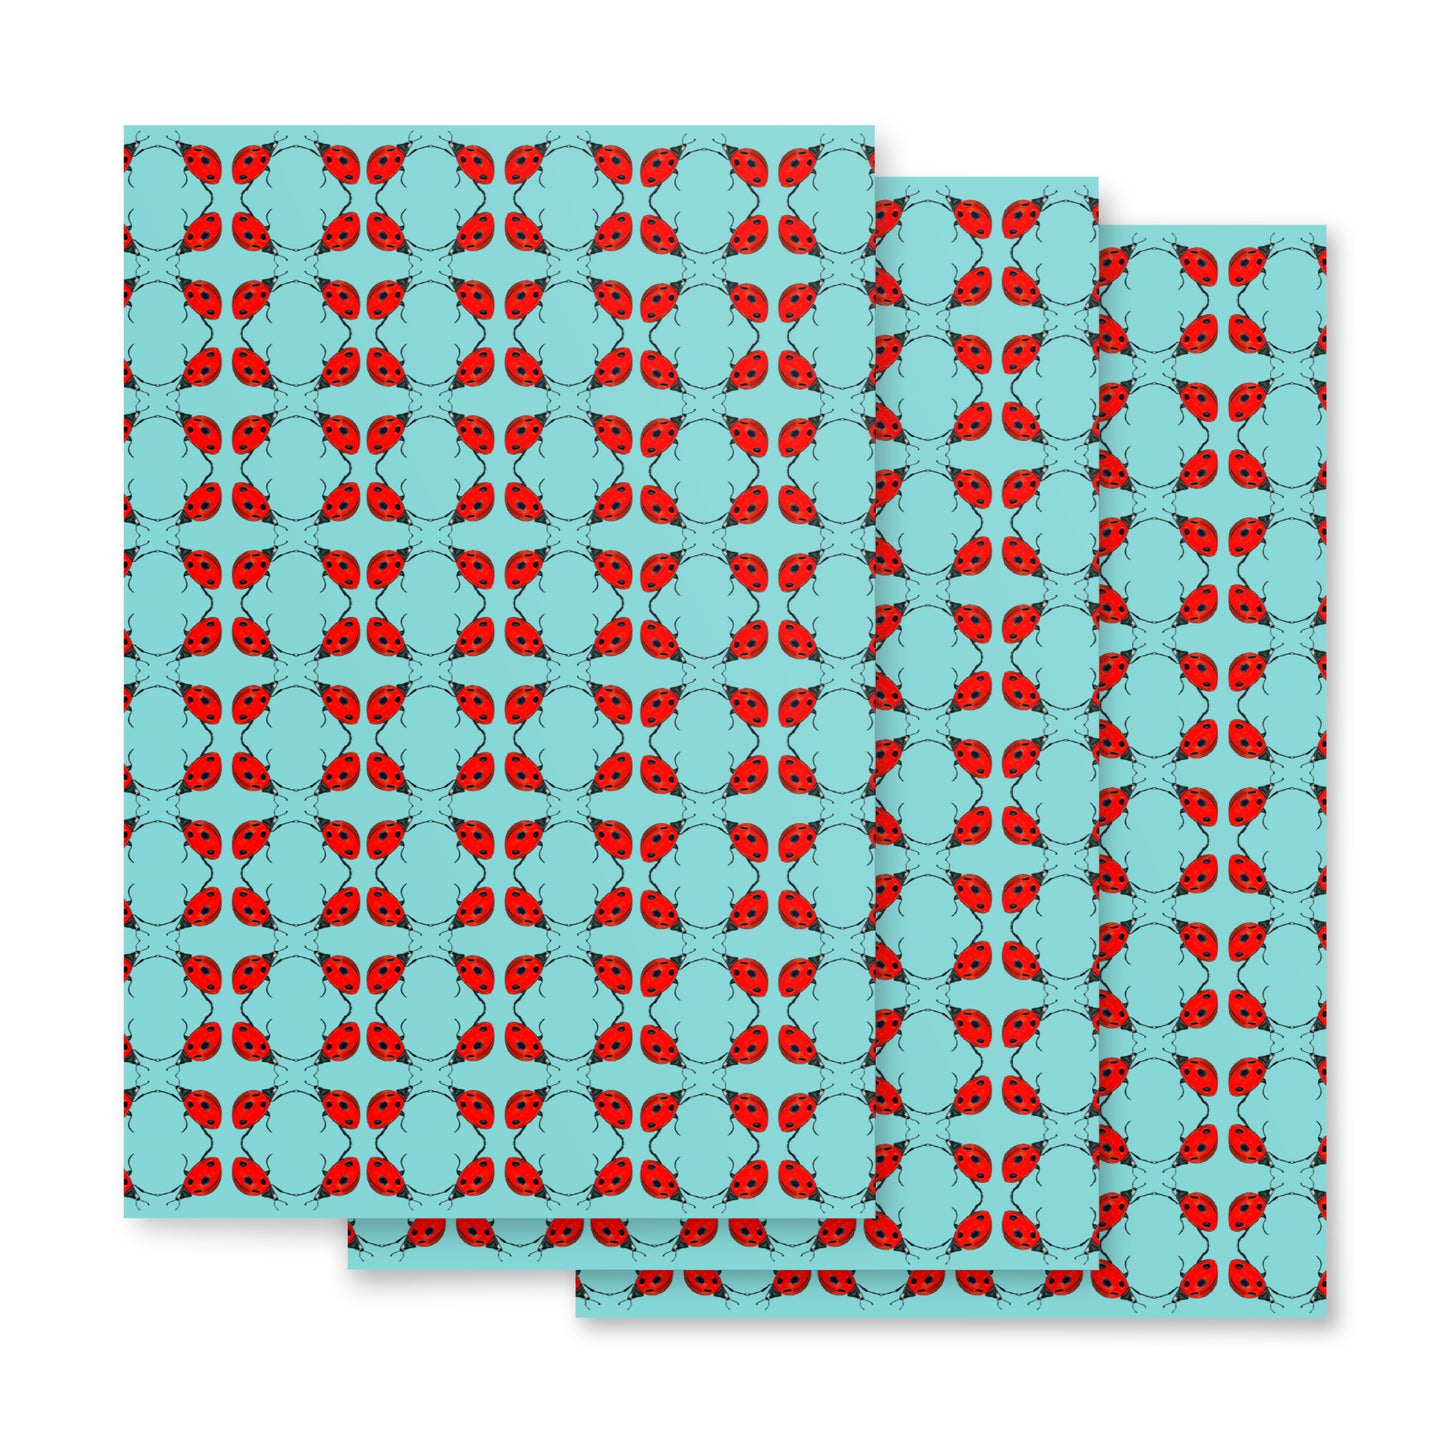 Ladybug Wrapping paper sheets